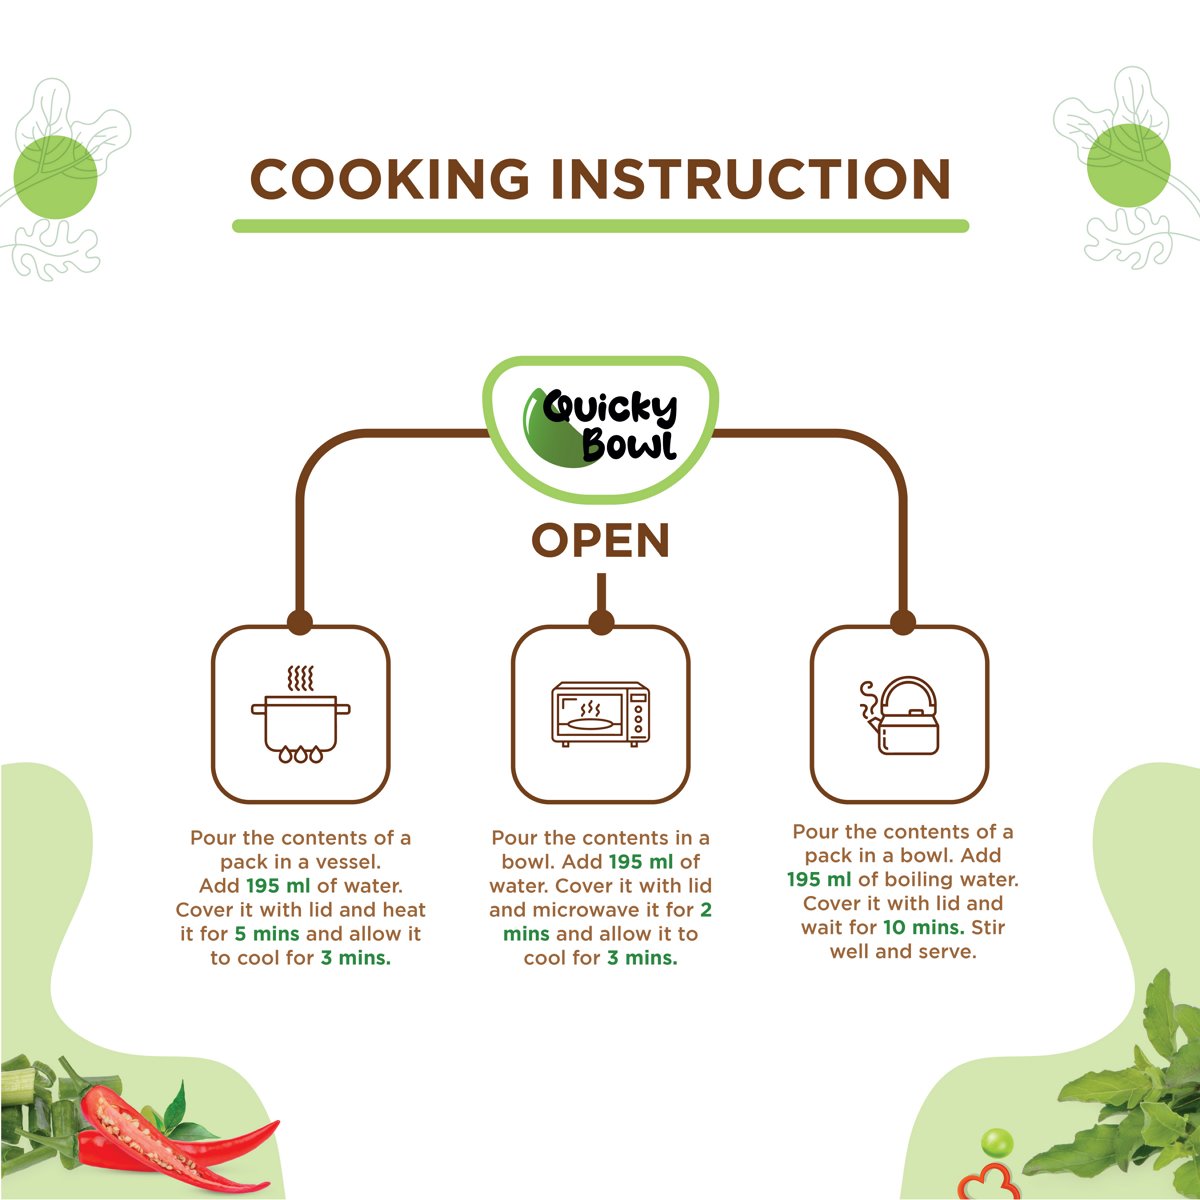 Quickybowl Jain Dal Khichdi cooking instructions.